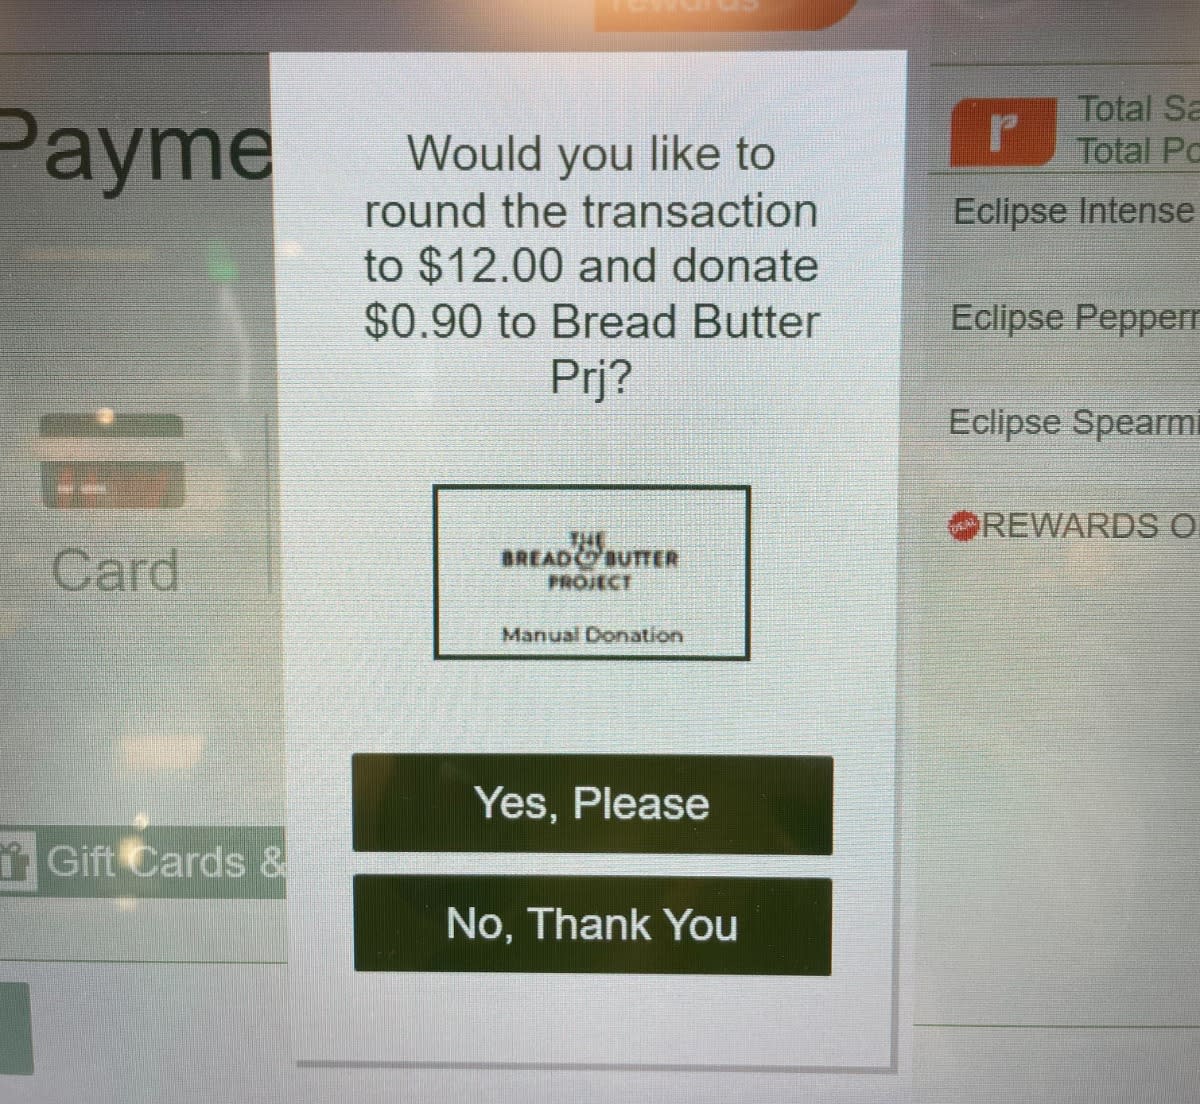 Alert for charity donation request on Woolworths self-serve checkout screen